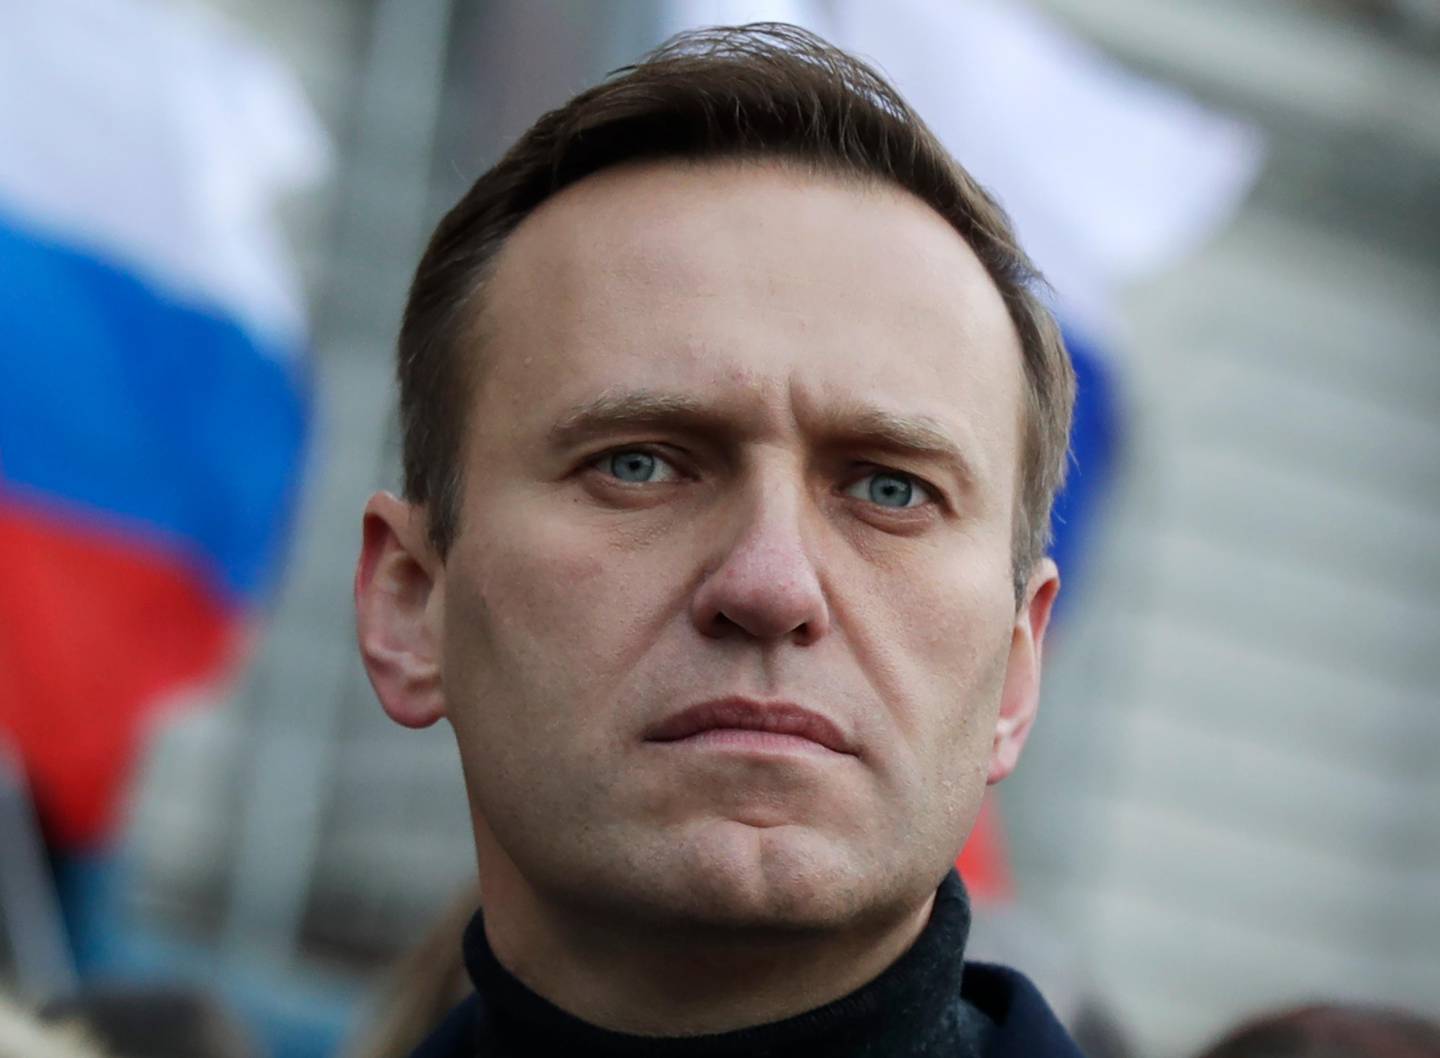 FILE - In this file photo taken on Saturday, Feb. 29, 2020, Russian opposition activist Alexei Navalny takes part in a march in memory of opposition leader Boris Nemtsov in Moscow, Russia. Navalny's team has backed a strike by election workers who don't want to subject themselves to the risk of contracting the coronavirus at polling stations. But the strikers admit they haven't gained much traction -- an open letter announcing the strike has so far gathered a little over 500 signatures. (AP Photo/Pavel Golovkin, File)